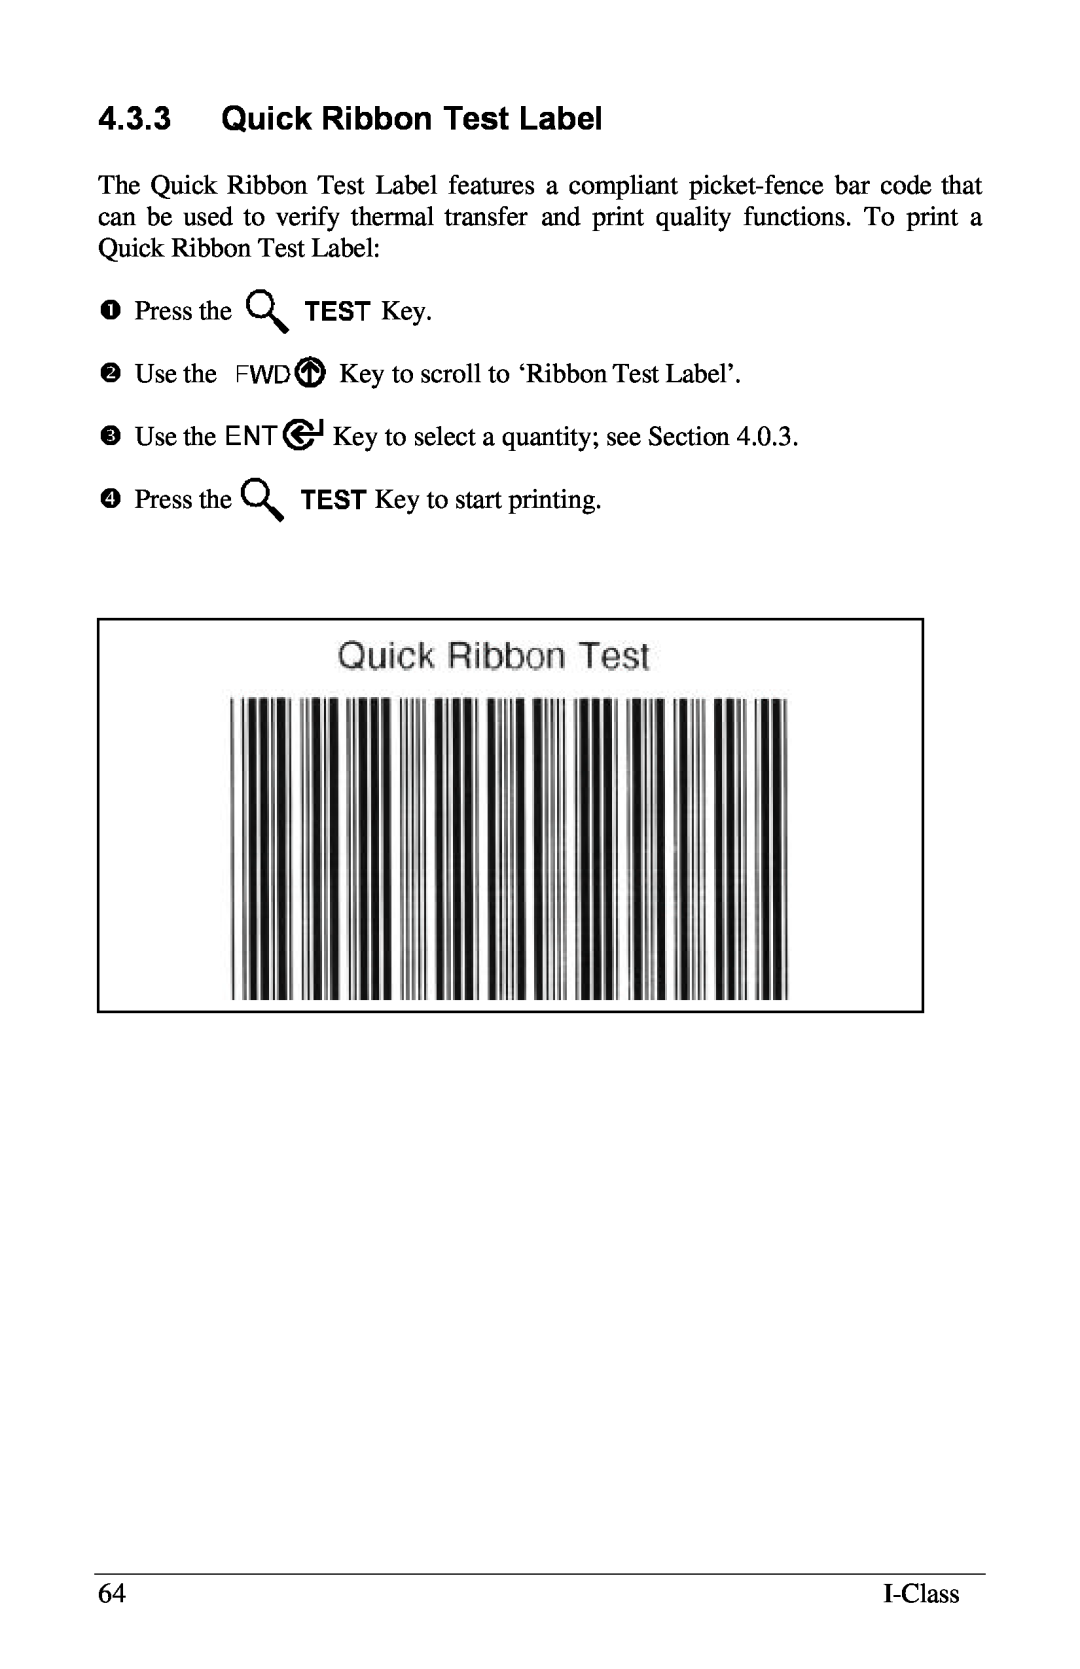 Xerox I Class manual 4.3.3Quick Ribbon Test Label, Œ Press the, •Use the Key to scroll to ‘Ribbon Test Label’, • Press the 